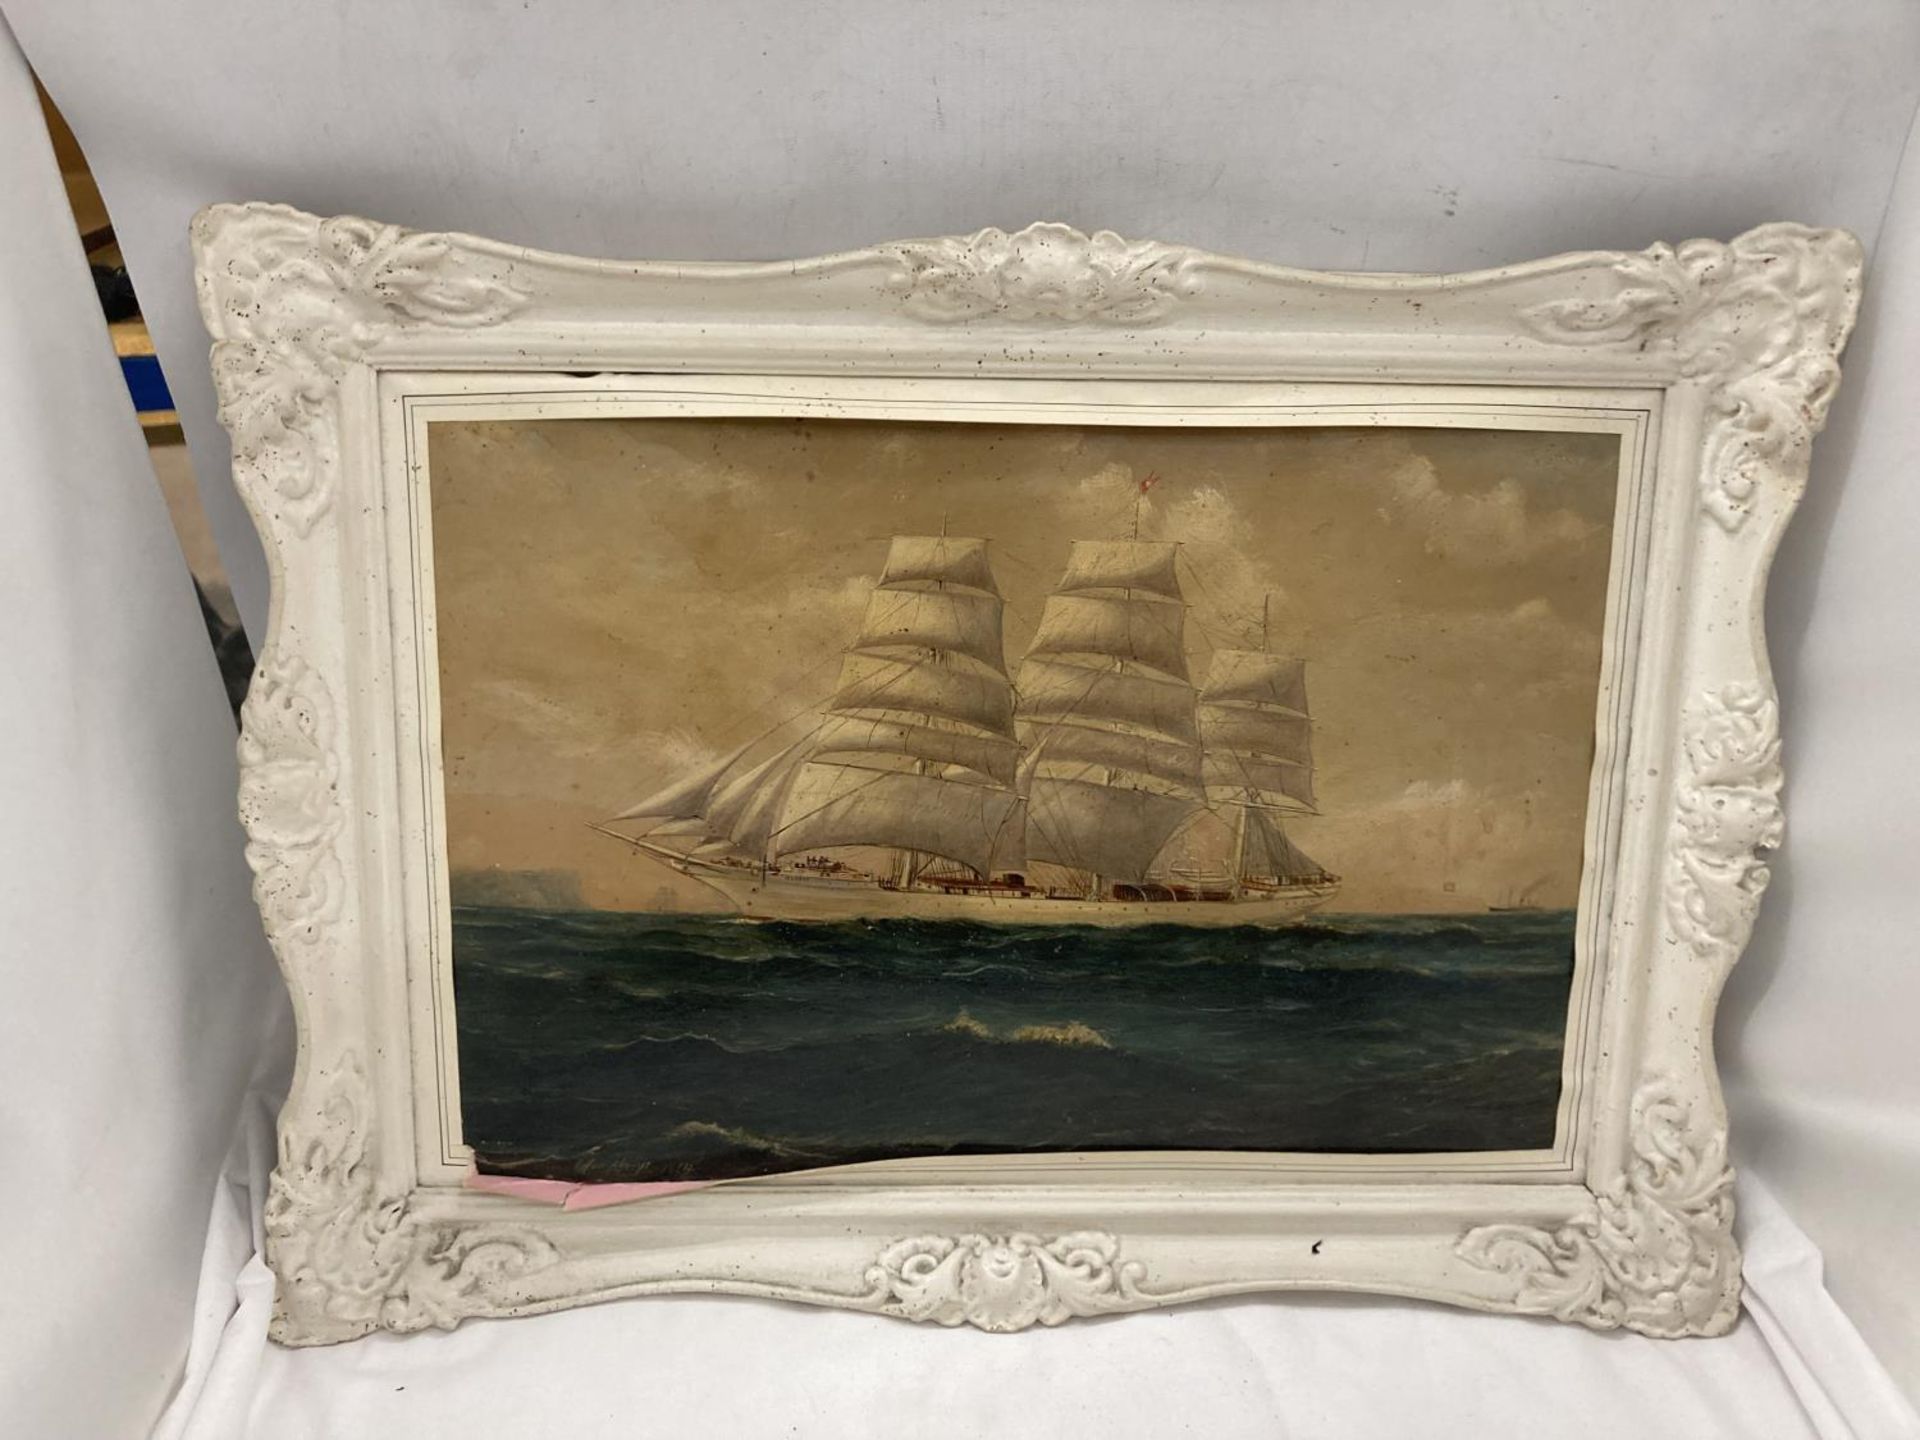 A FRAMED OIL ON BOARD OF A GALLEON SIGNED A HUMPHERYS 1914 TI LOWER LEFT HAND CORNER WITH MERSEY A